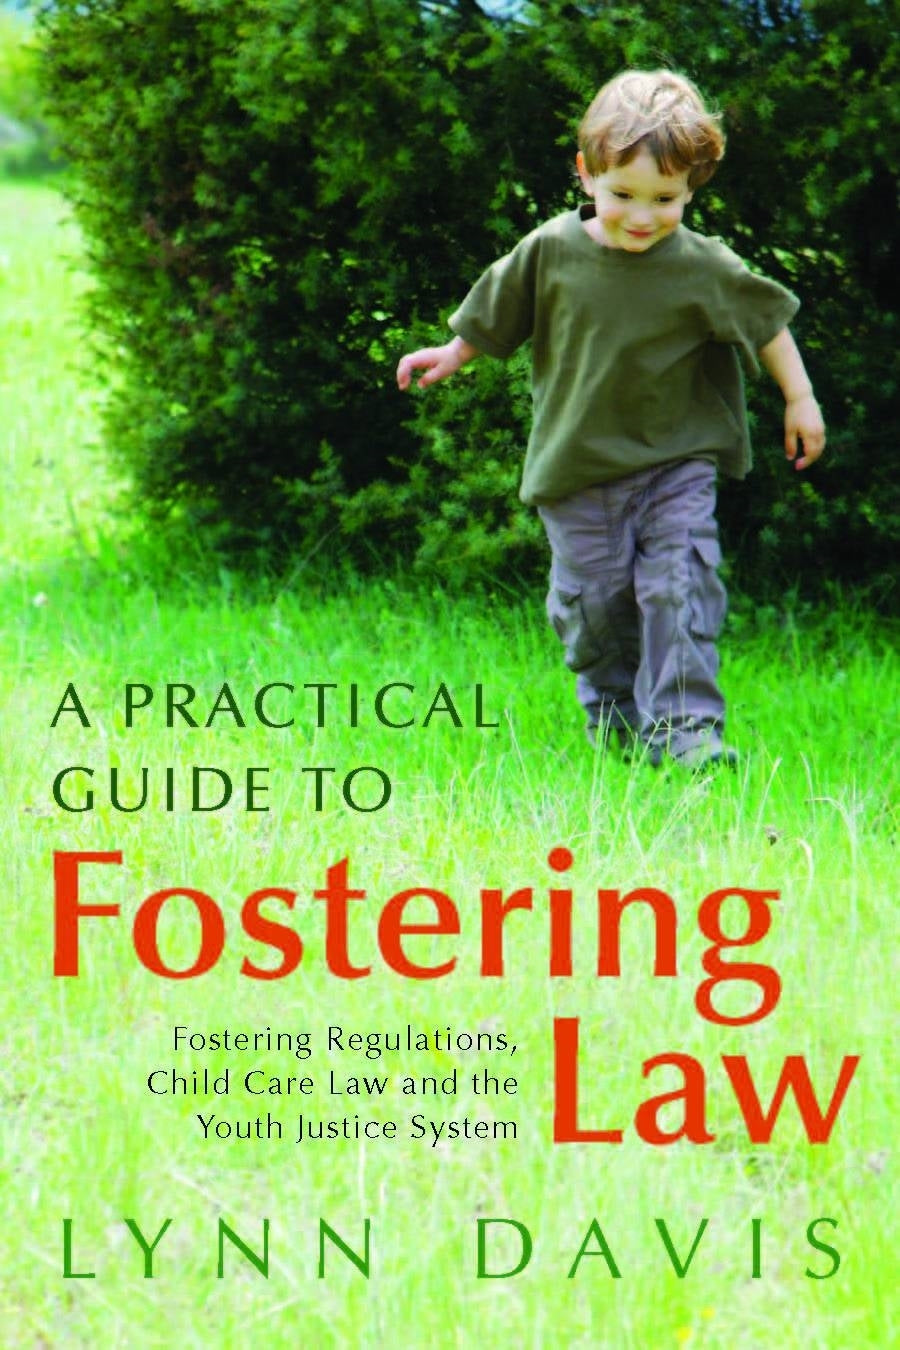 A Practical Guide to Fostering Law by Lynn Davis